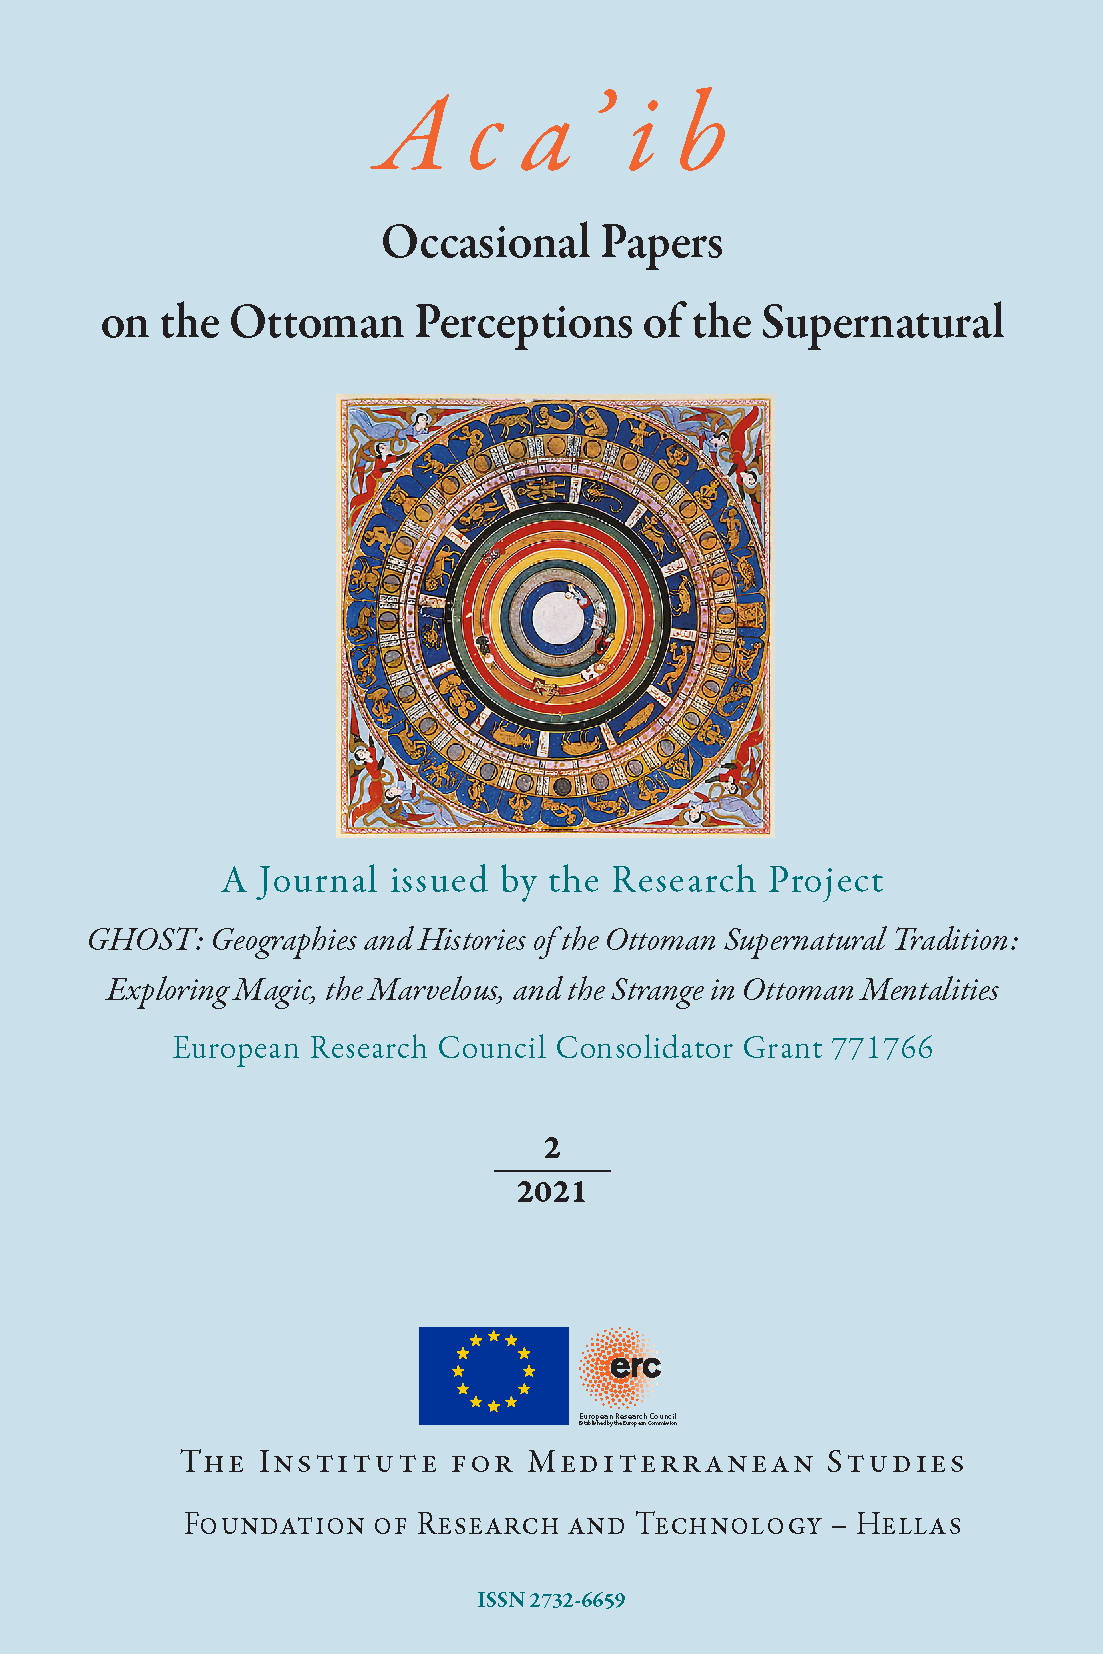 You are currently viewing The second issue of our GHOST online, open-access journal “Aca’ib: Occasional papers on the Ottoman perceptions of the supernatural” has been launched!